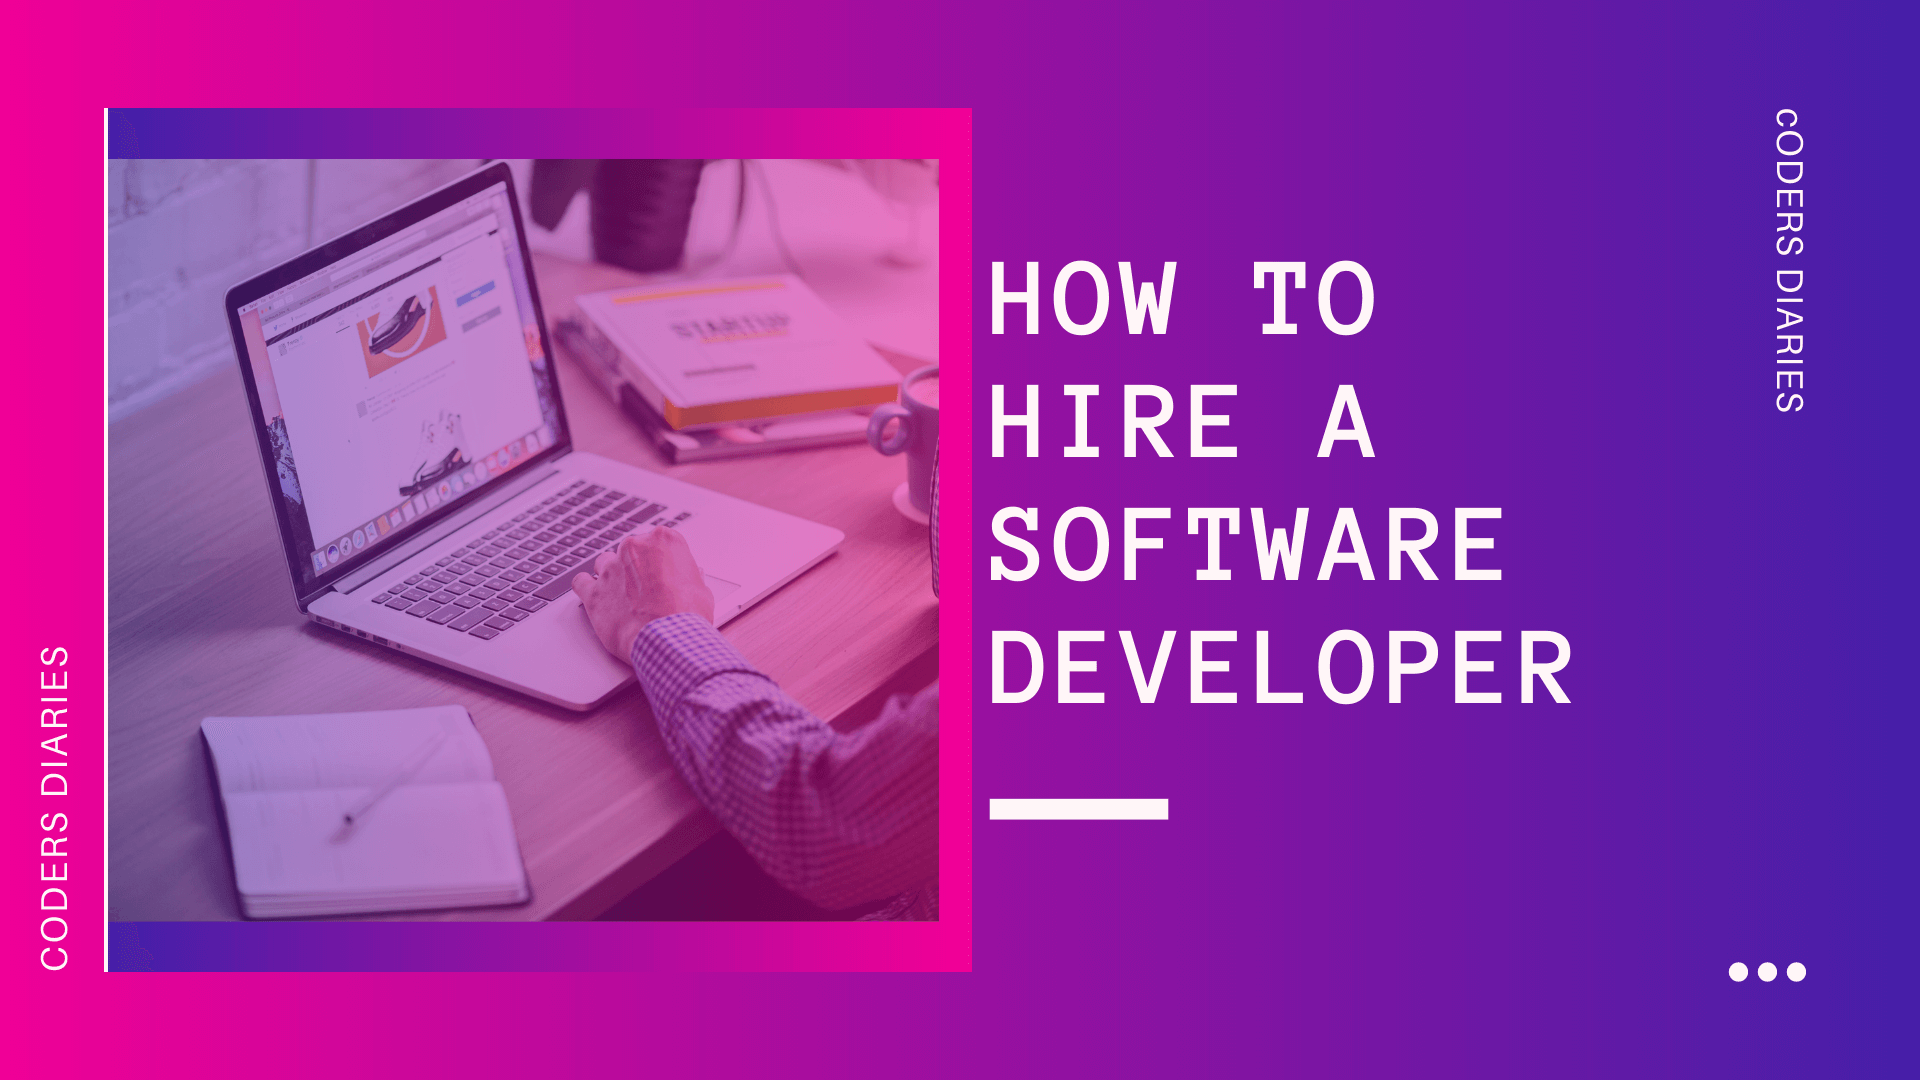 How to hire a software developer 2021